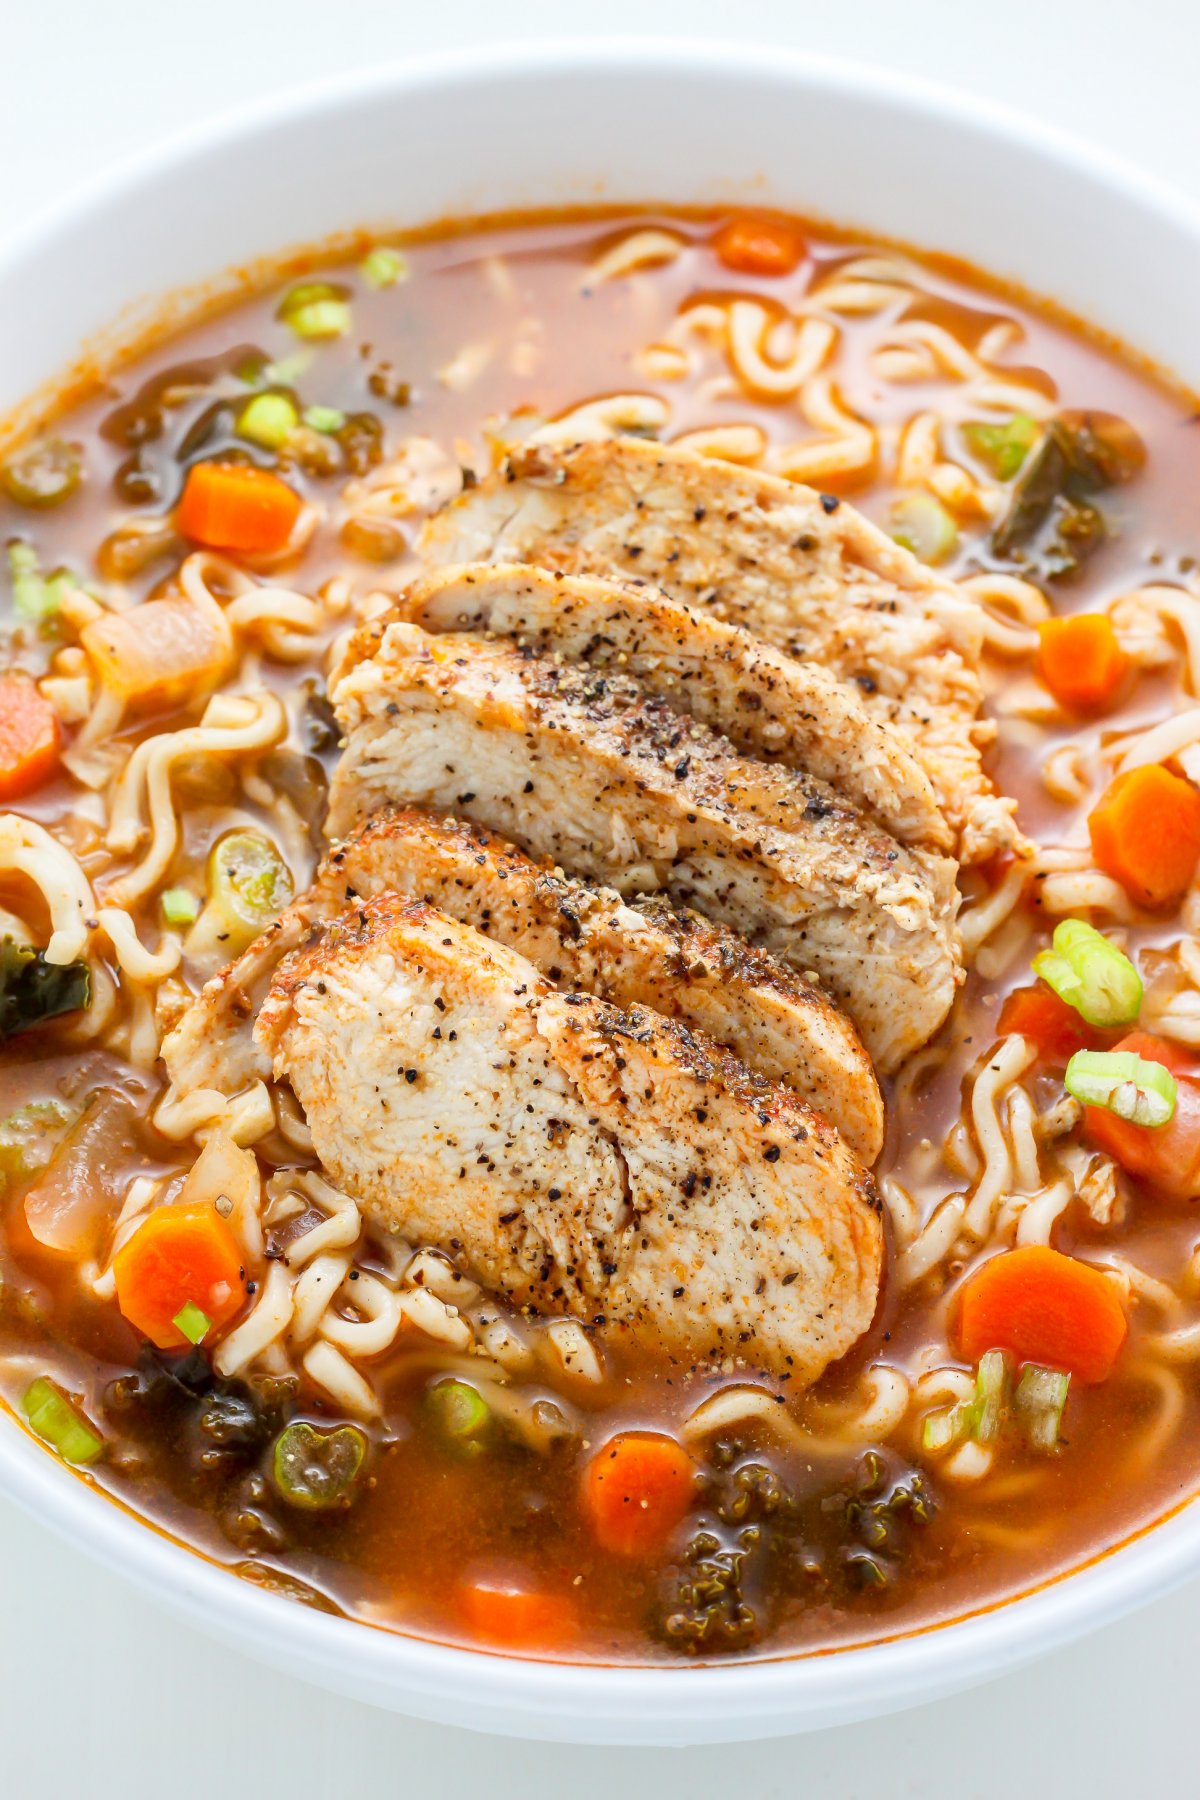 Hearty and Healthy, this Blackened Chicken Ramen Noodle Soup is loaded with carrots, kale, and a TON of flavor! Make this the next time you're craving cozy comfort food - it does the trick every time.